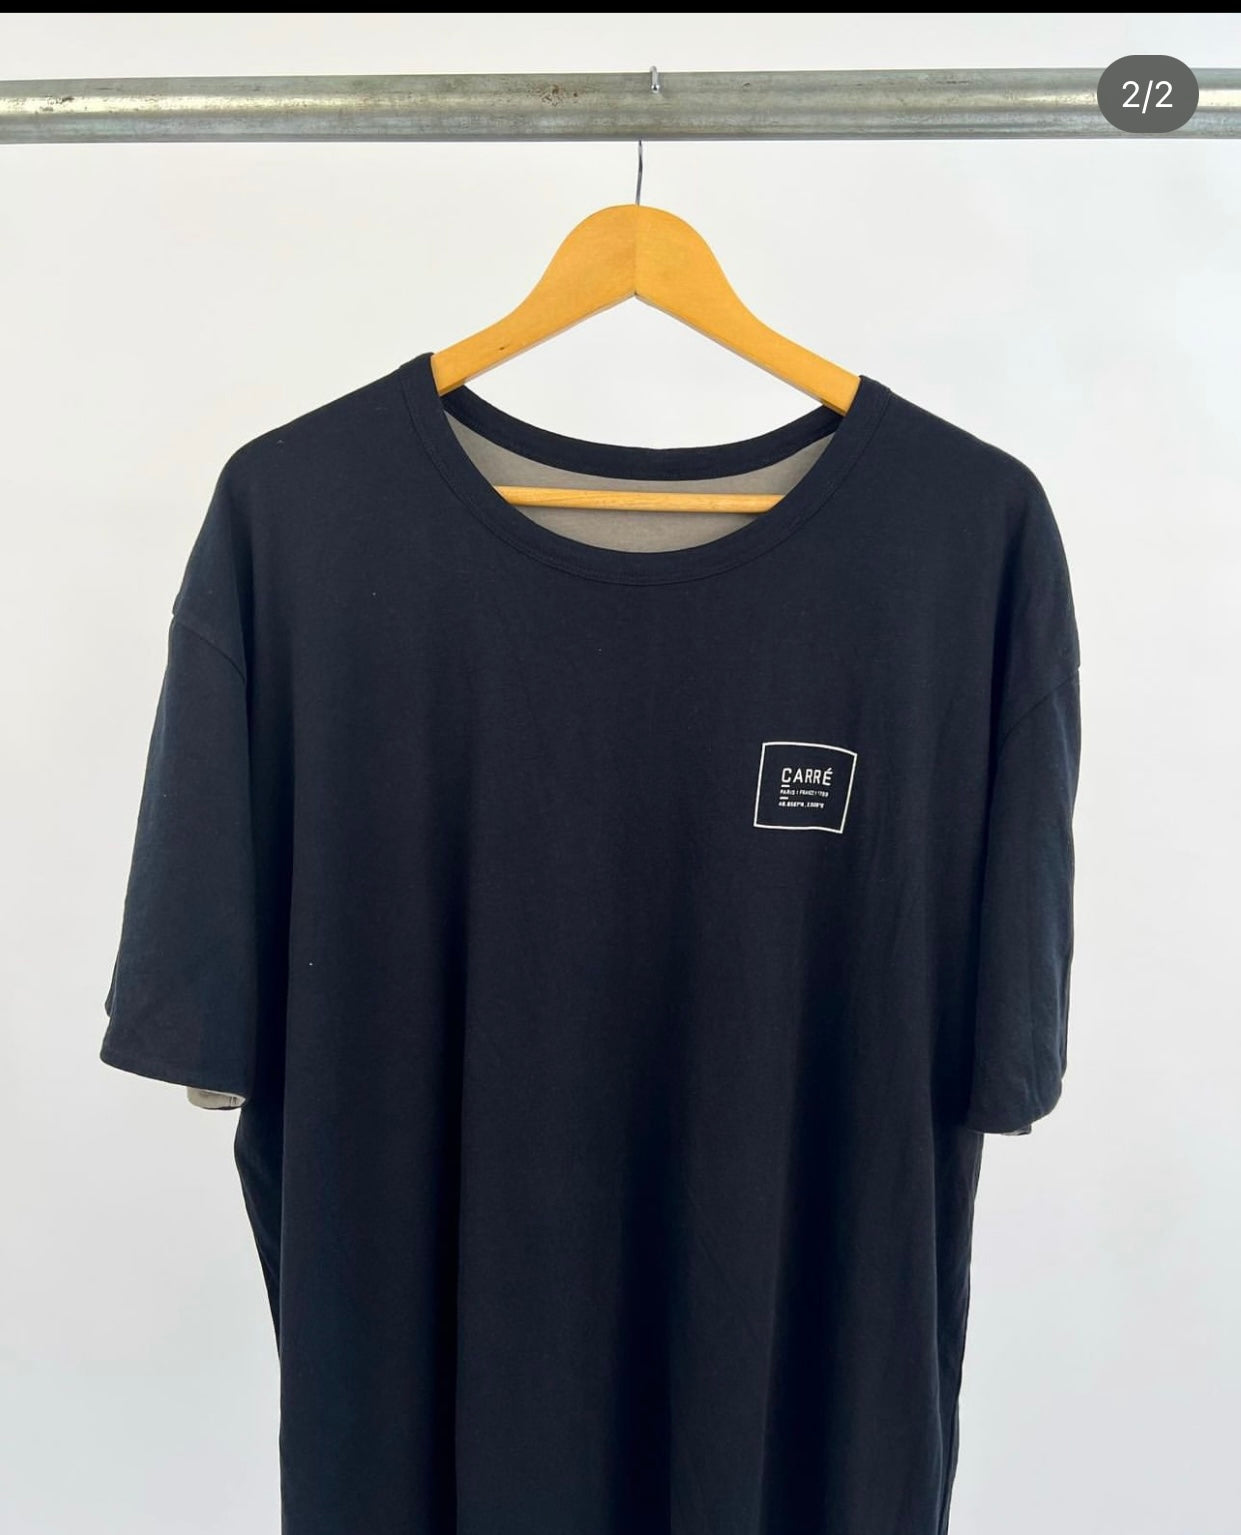 Carre two way tee